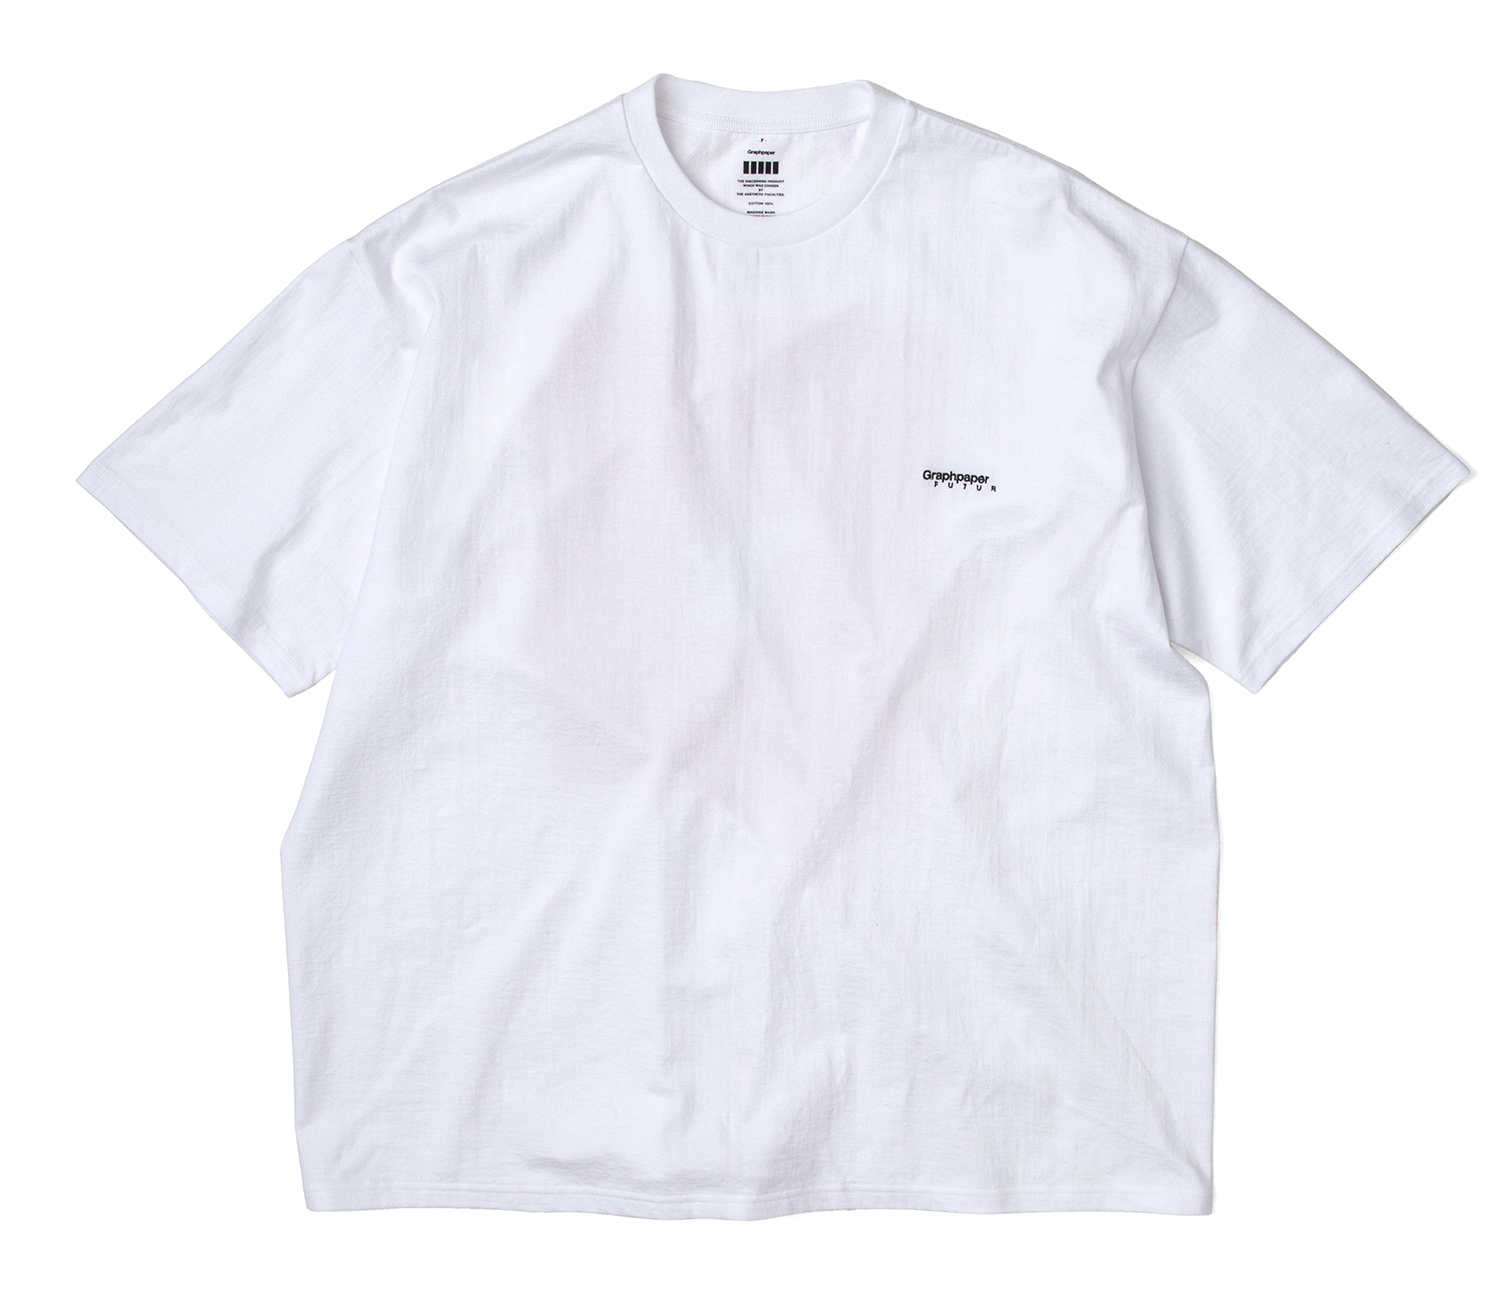 FUTUR for Graphpaper S/S Oversized Tee | myglobaltax.com